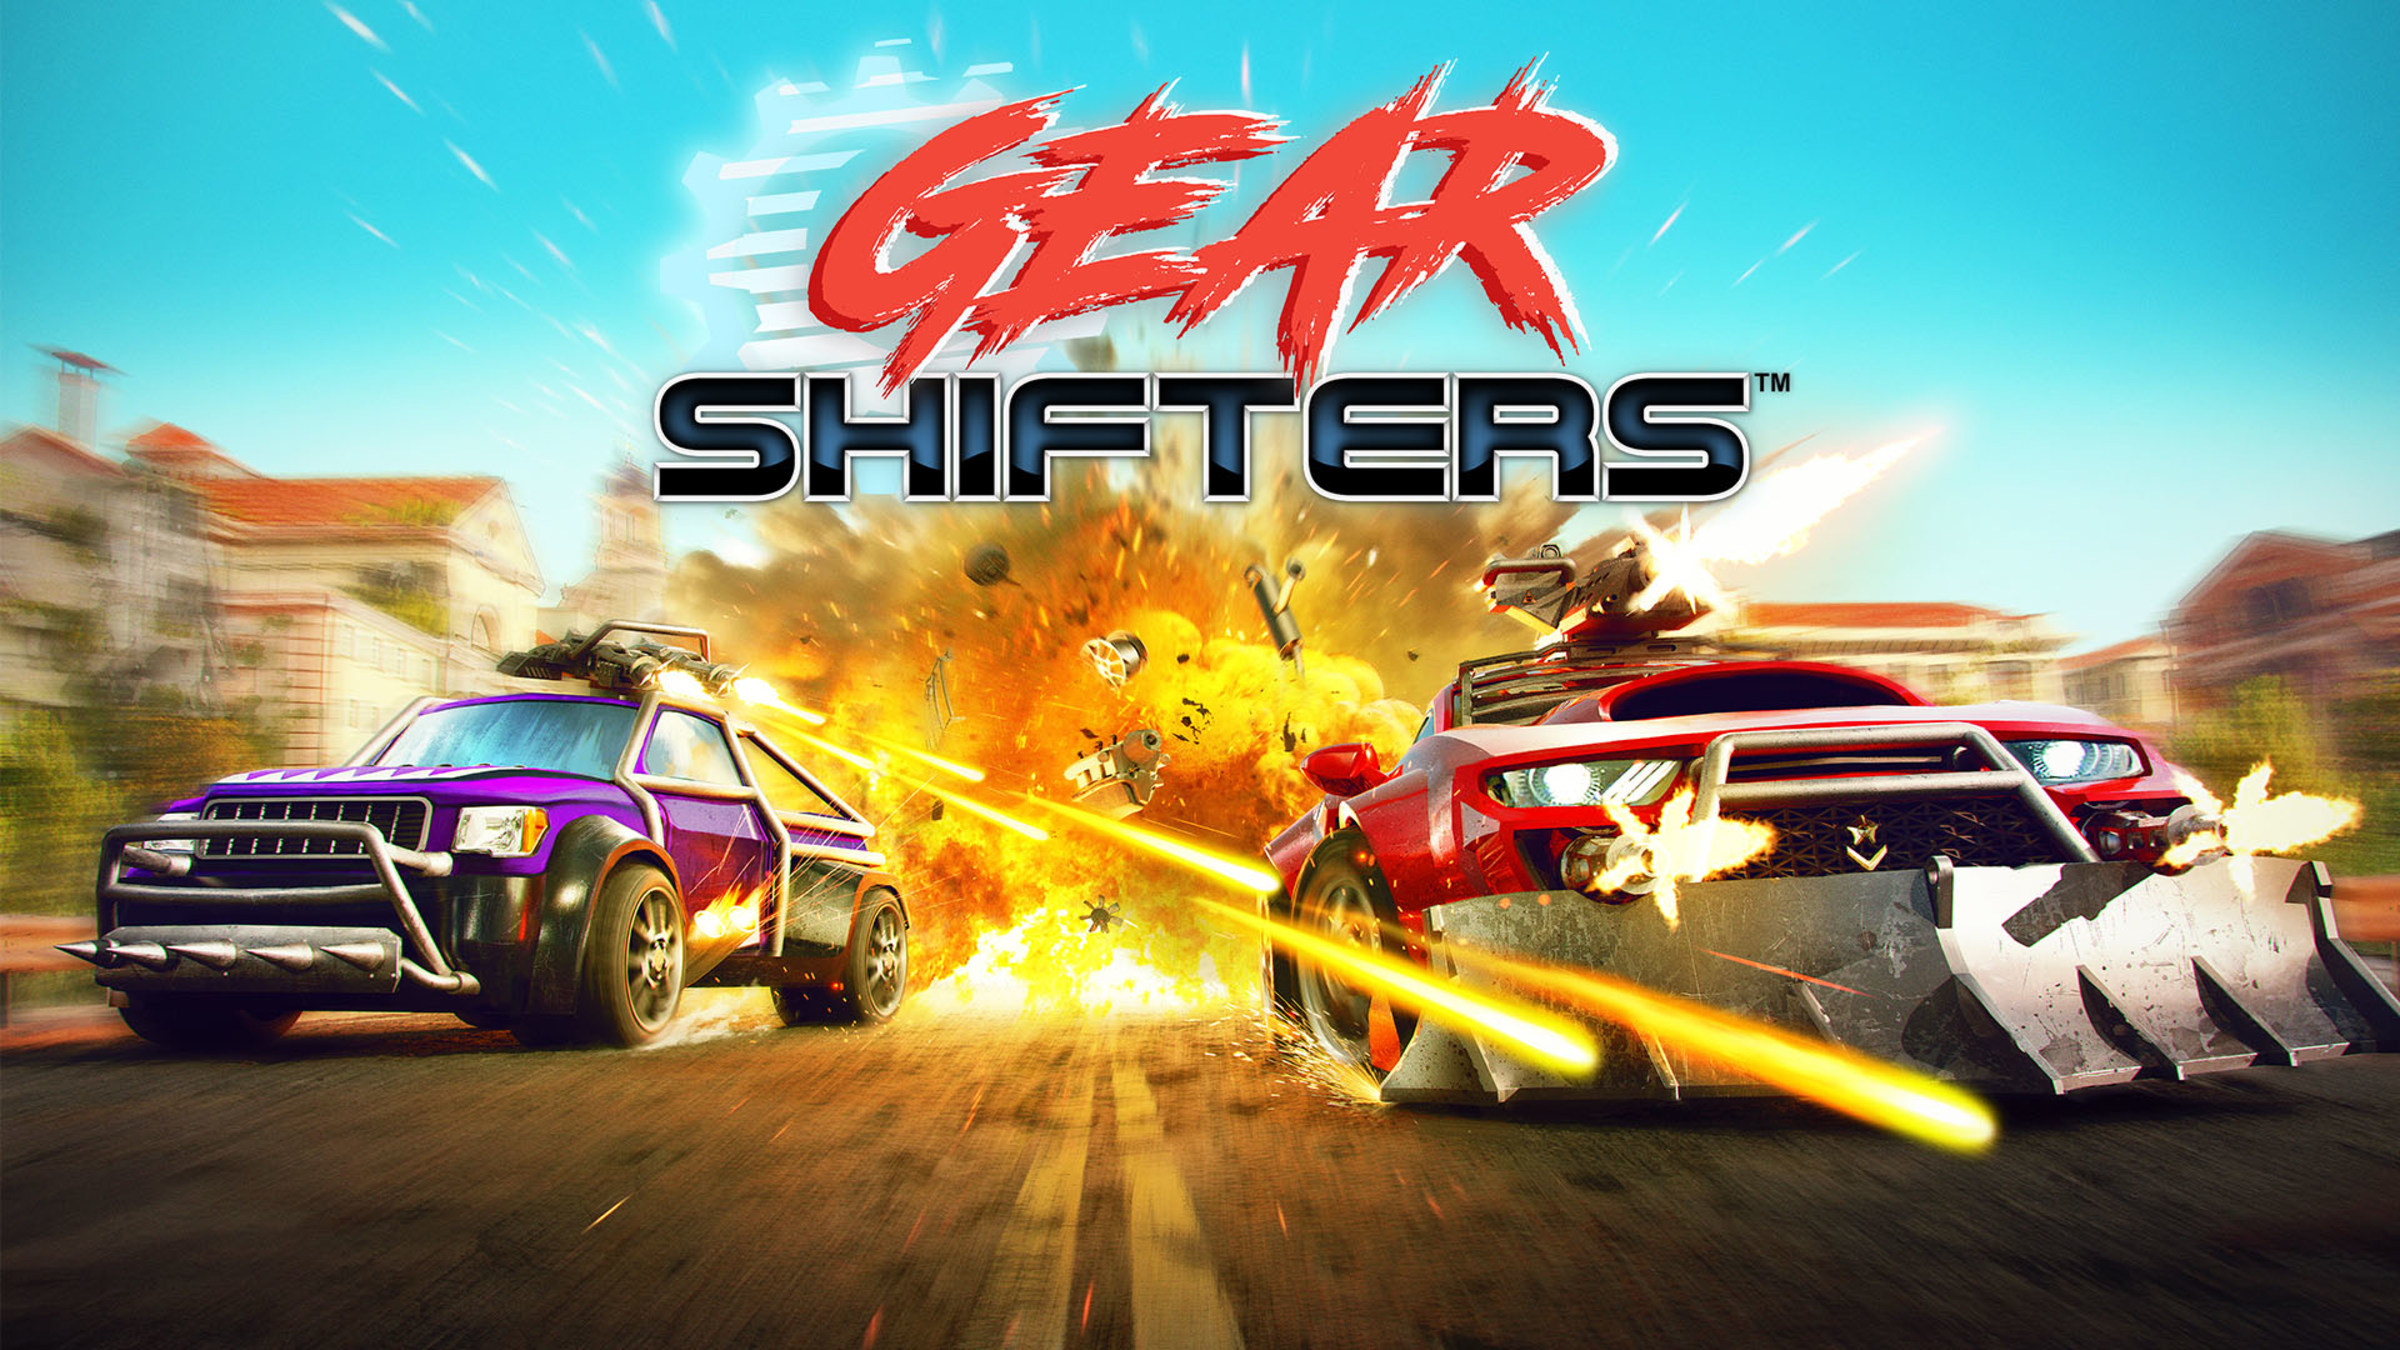 Gearshifters for Nintendo Switch